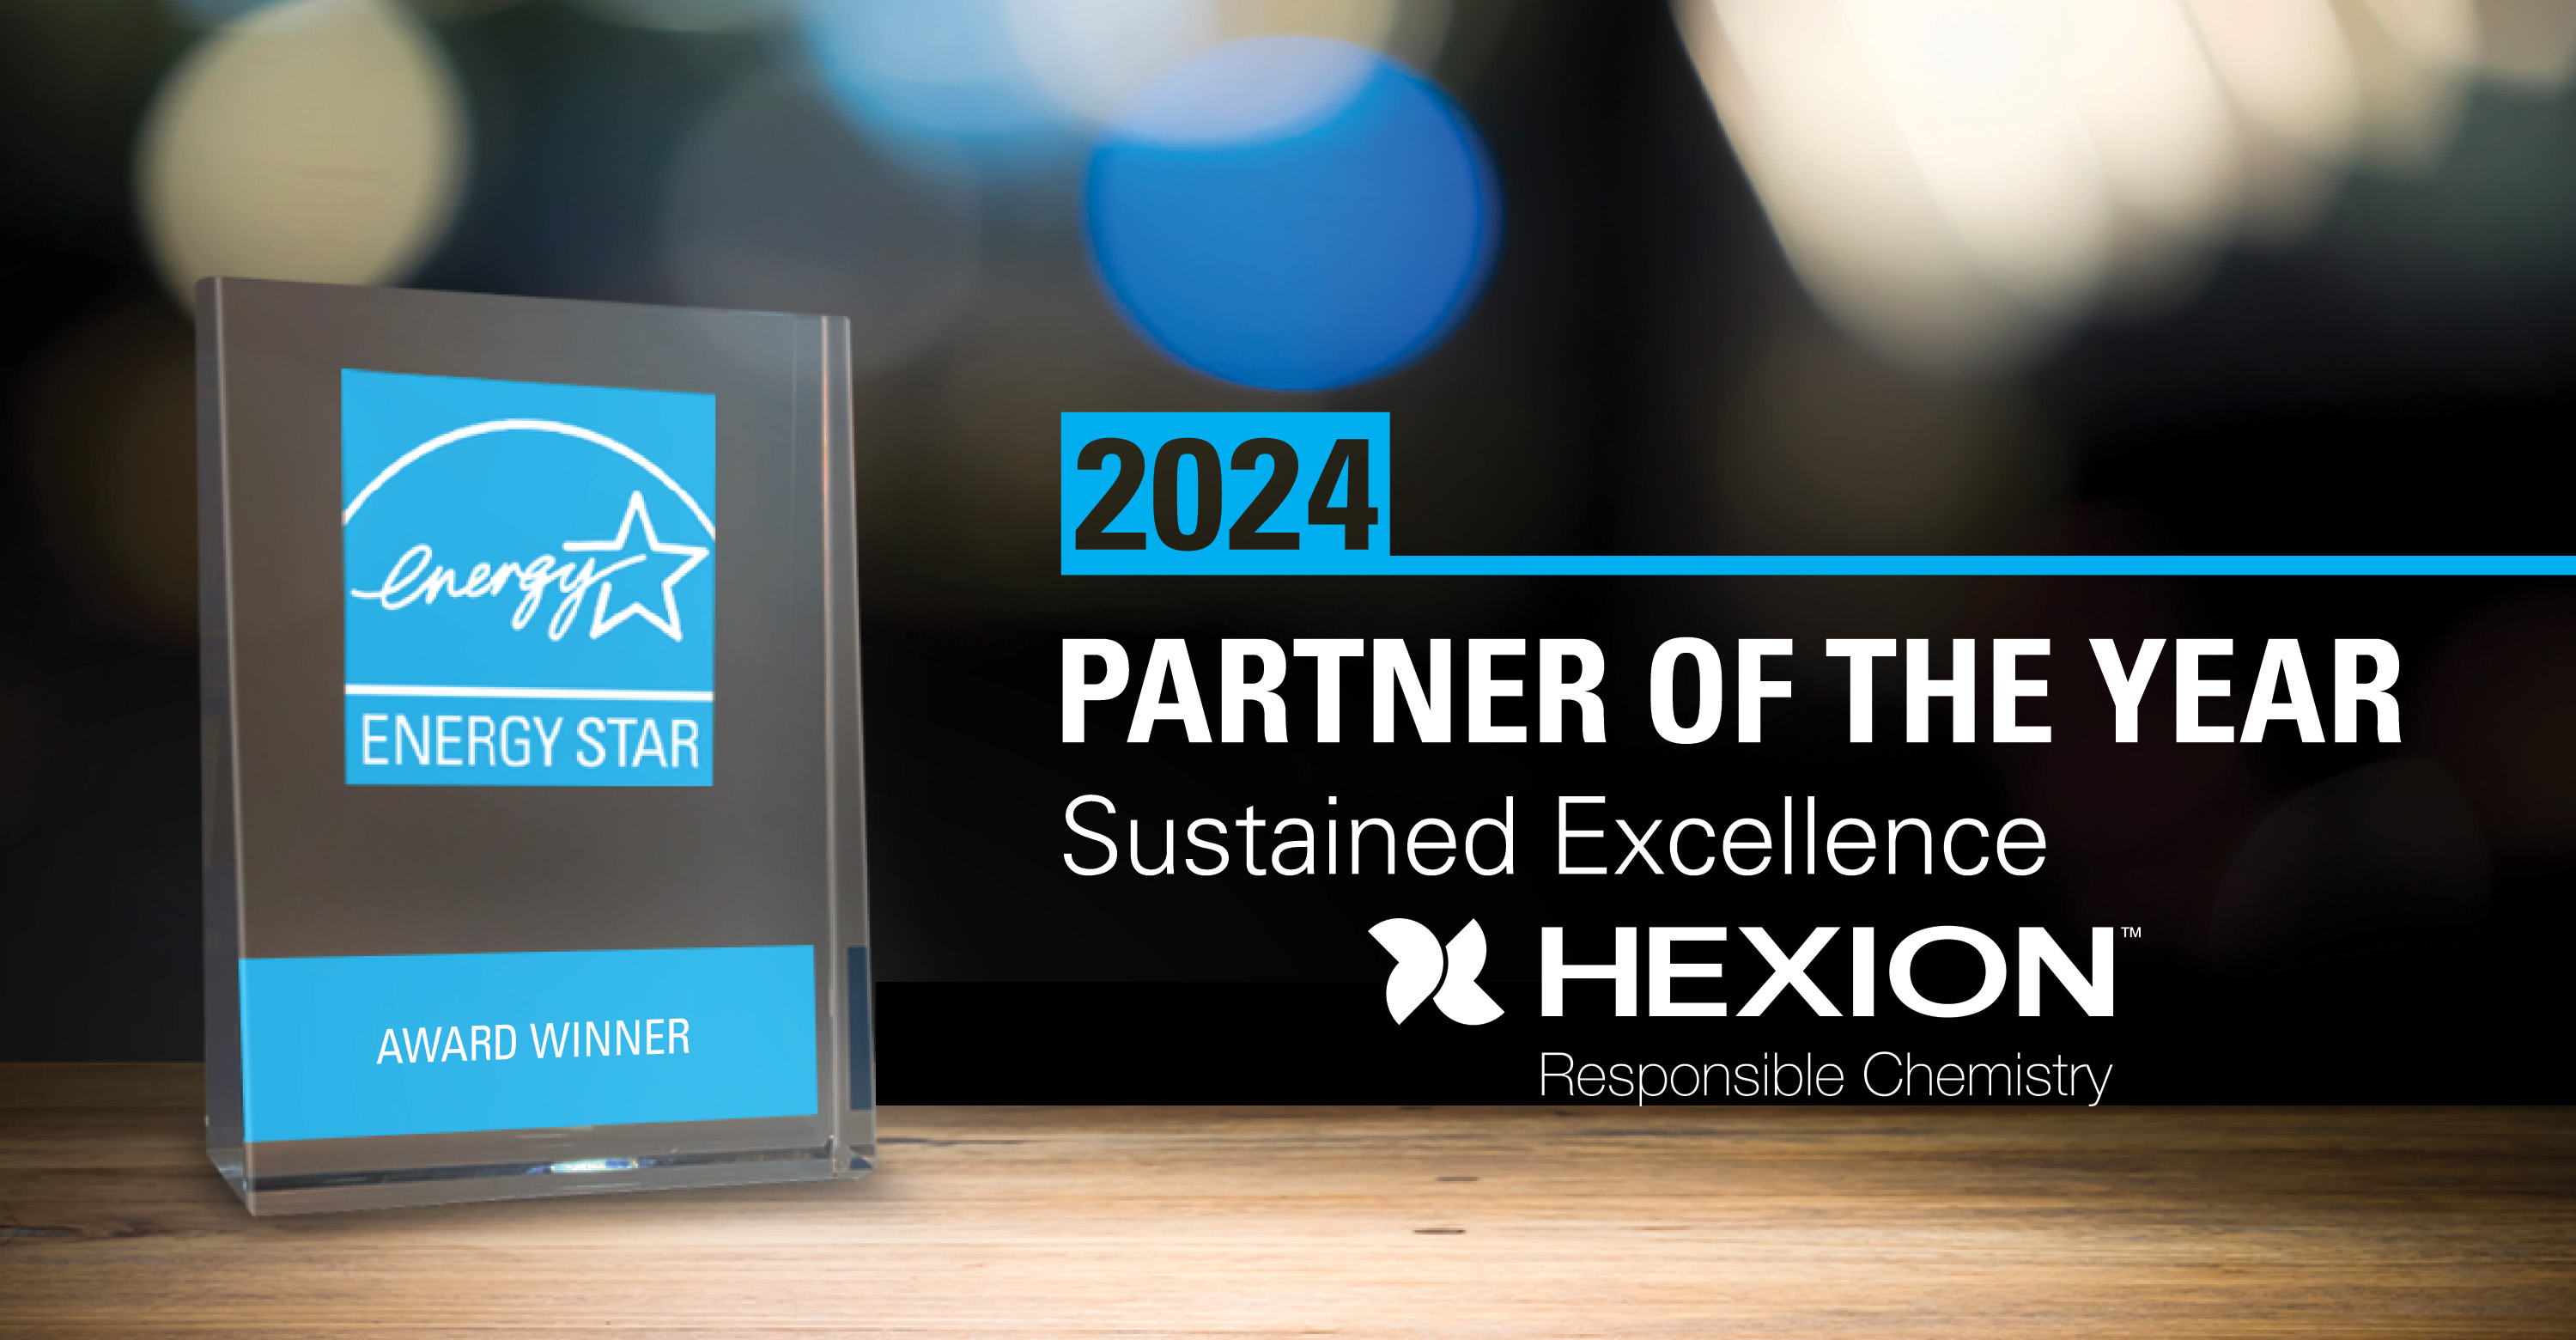 Energy Star Partner of the Year Sustained Excellence 2024